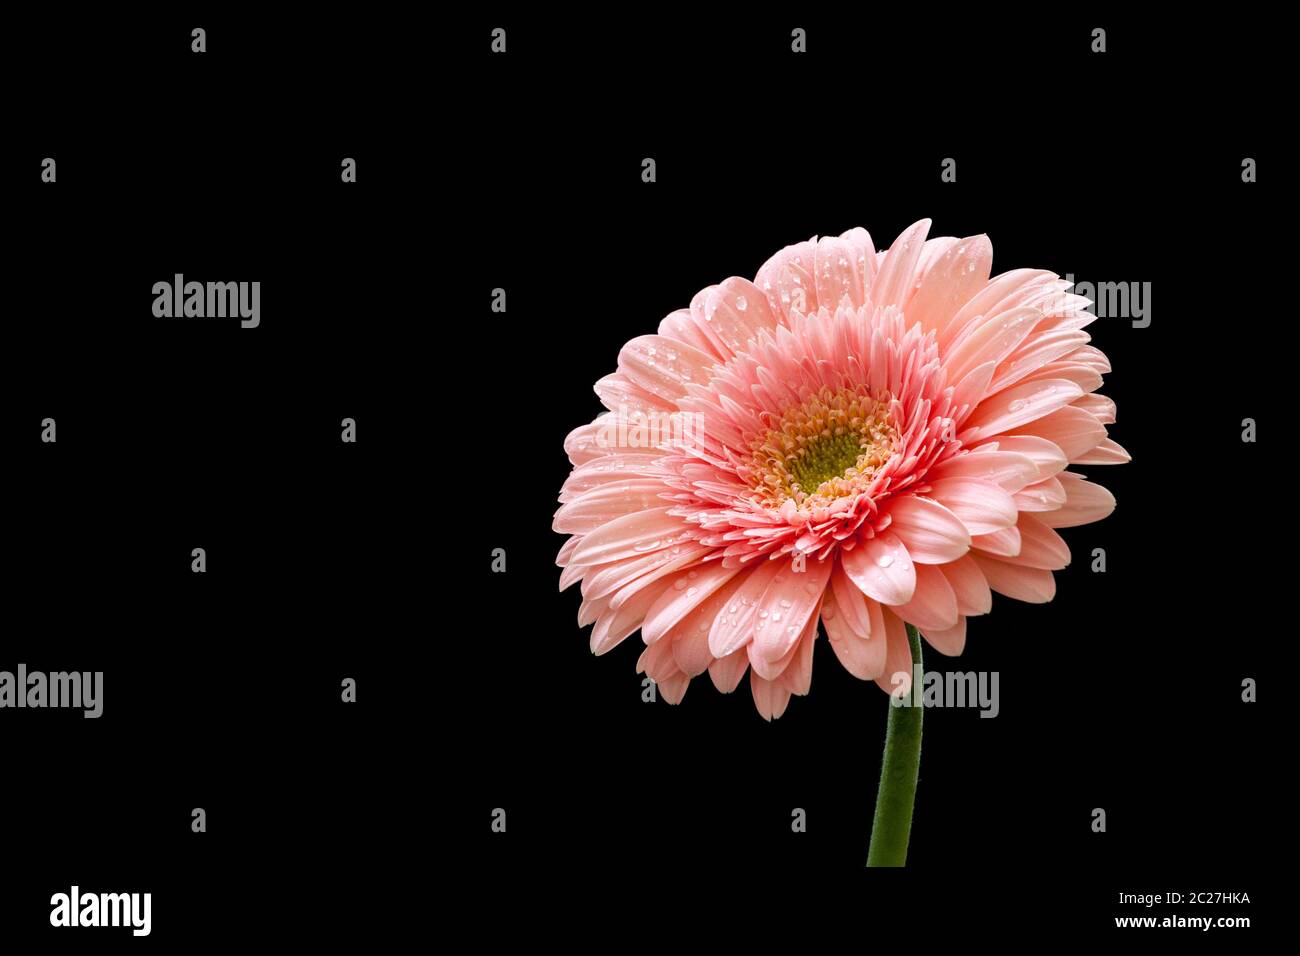 Beautiful pink gerbera flower isolated on a black background. Stock Photo